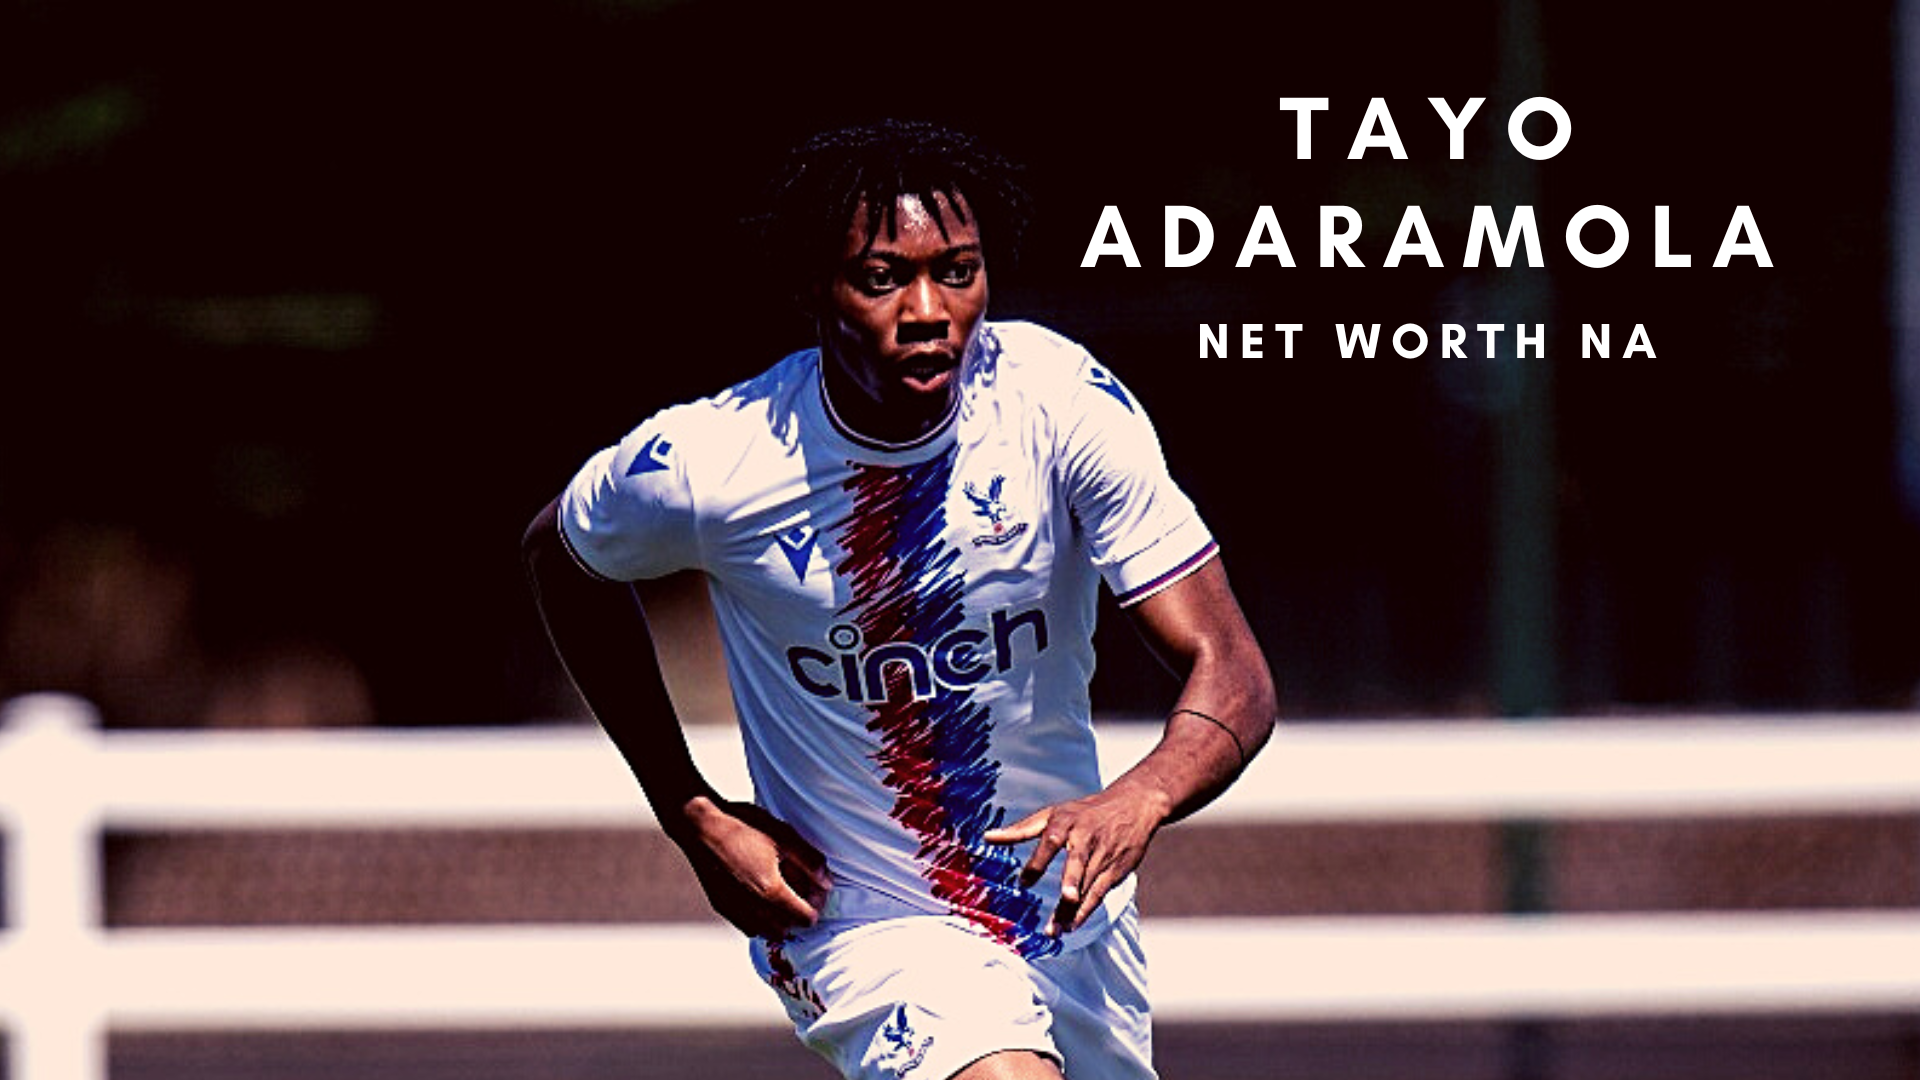 Tayo Adaramola has been recalled from his loan spell at Coventry City. (Credits: @CPFC Twitter)